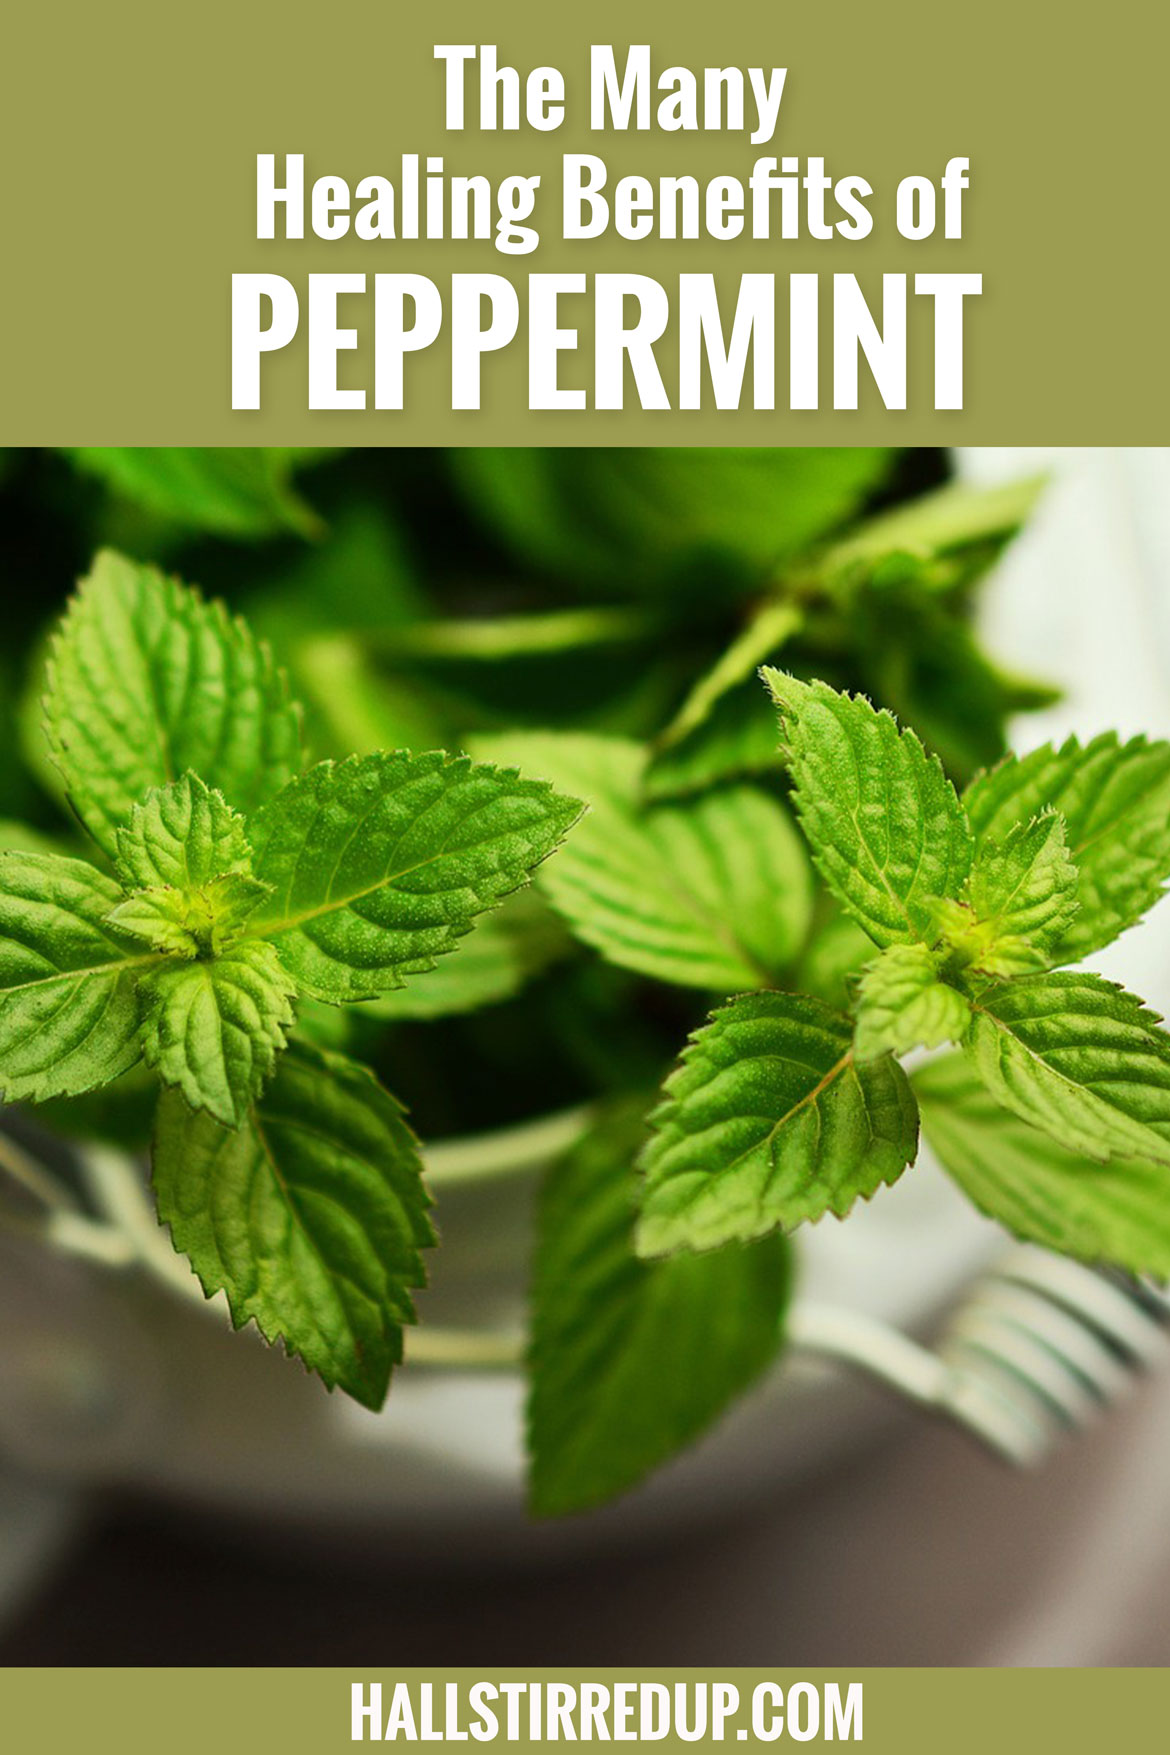 The many healing benefits of Peppermint